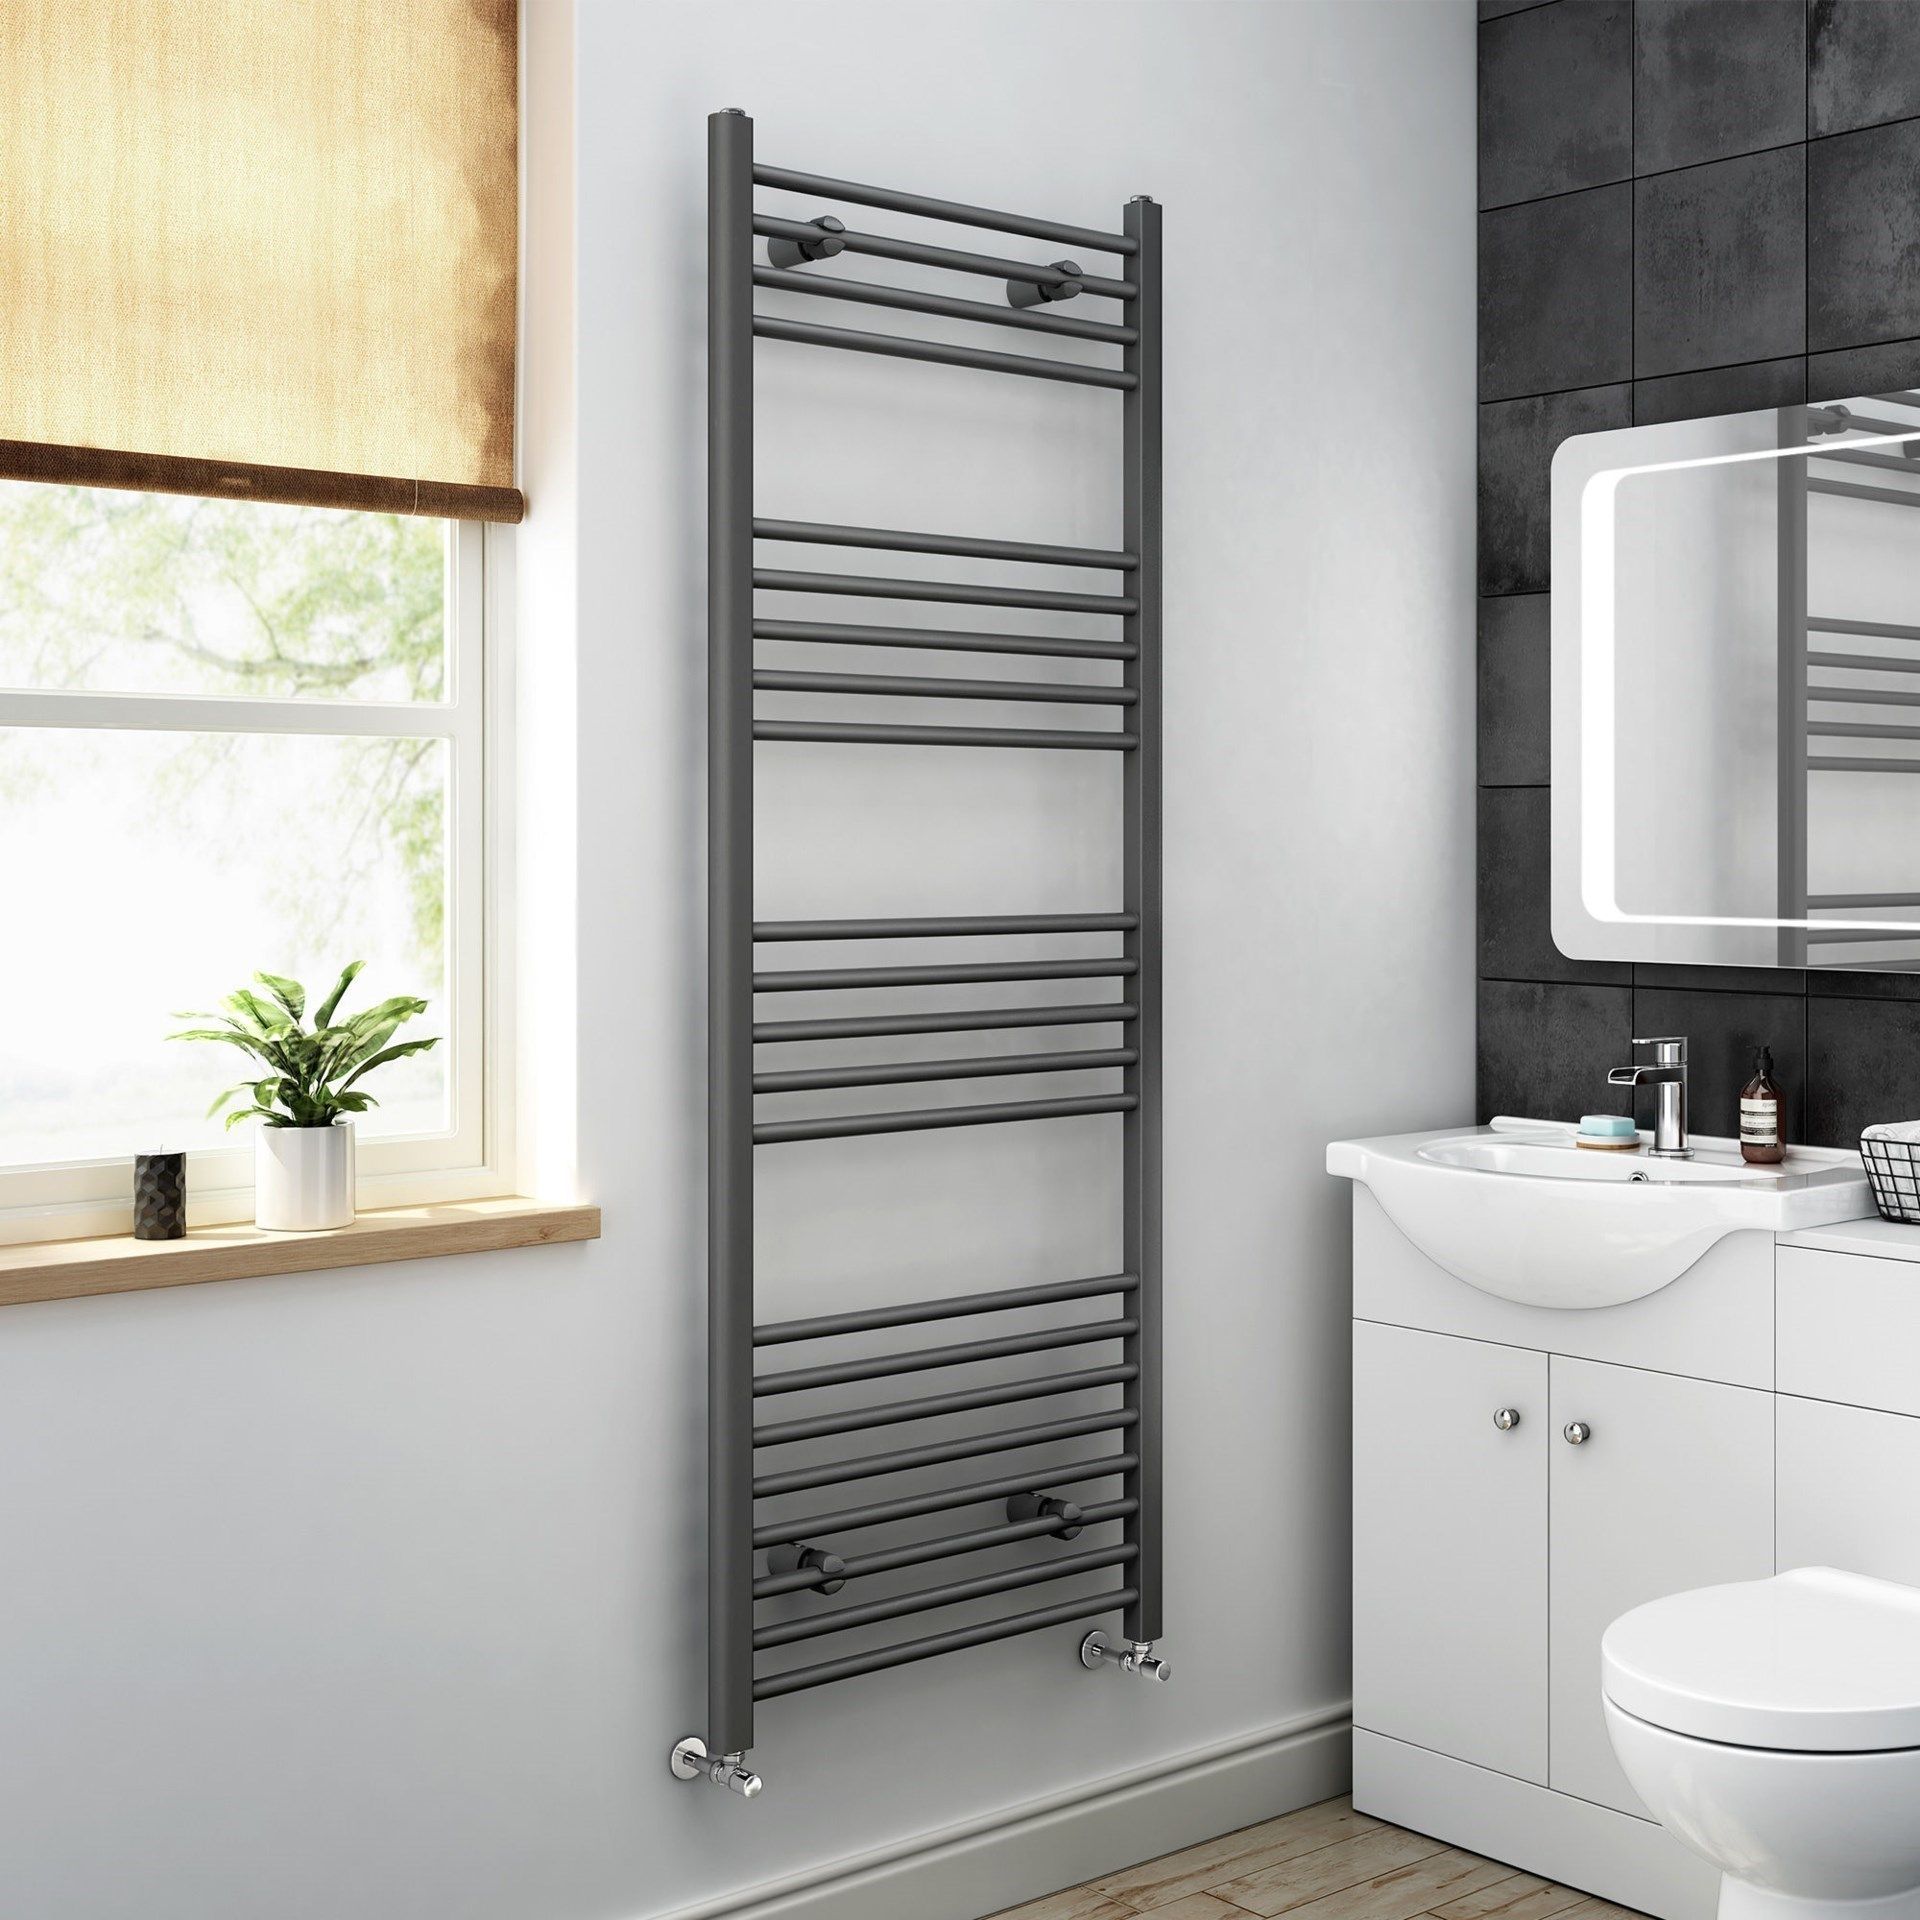 Brand New 1600x500mm - 20mm Tubes - Anthracite Heated Straight Rail Ladder Towel Radiator. Na1600500 - Image 2 of 2